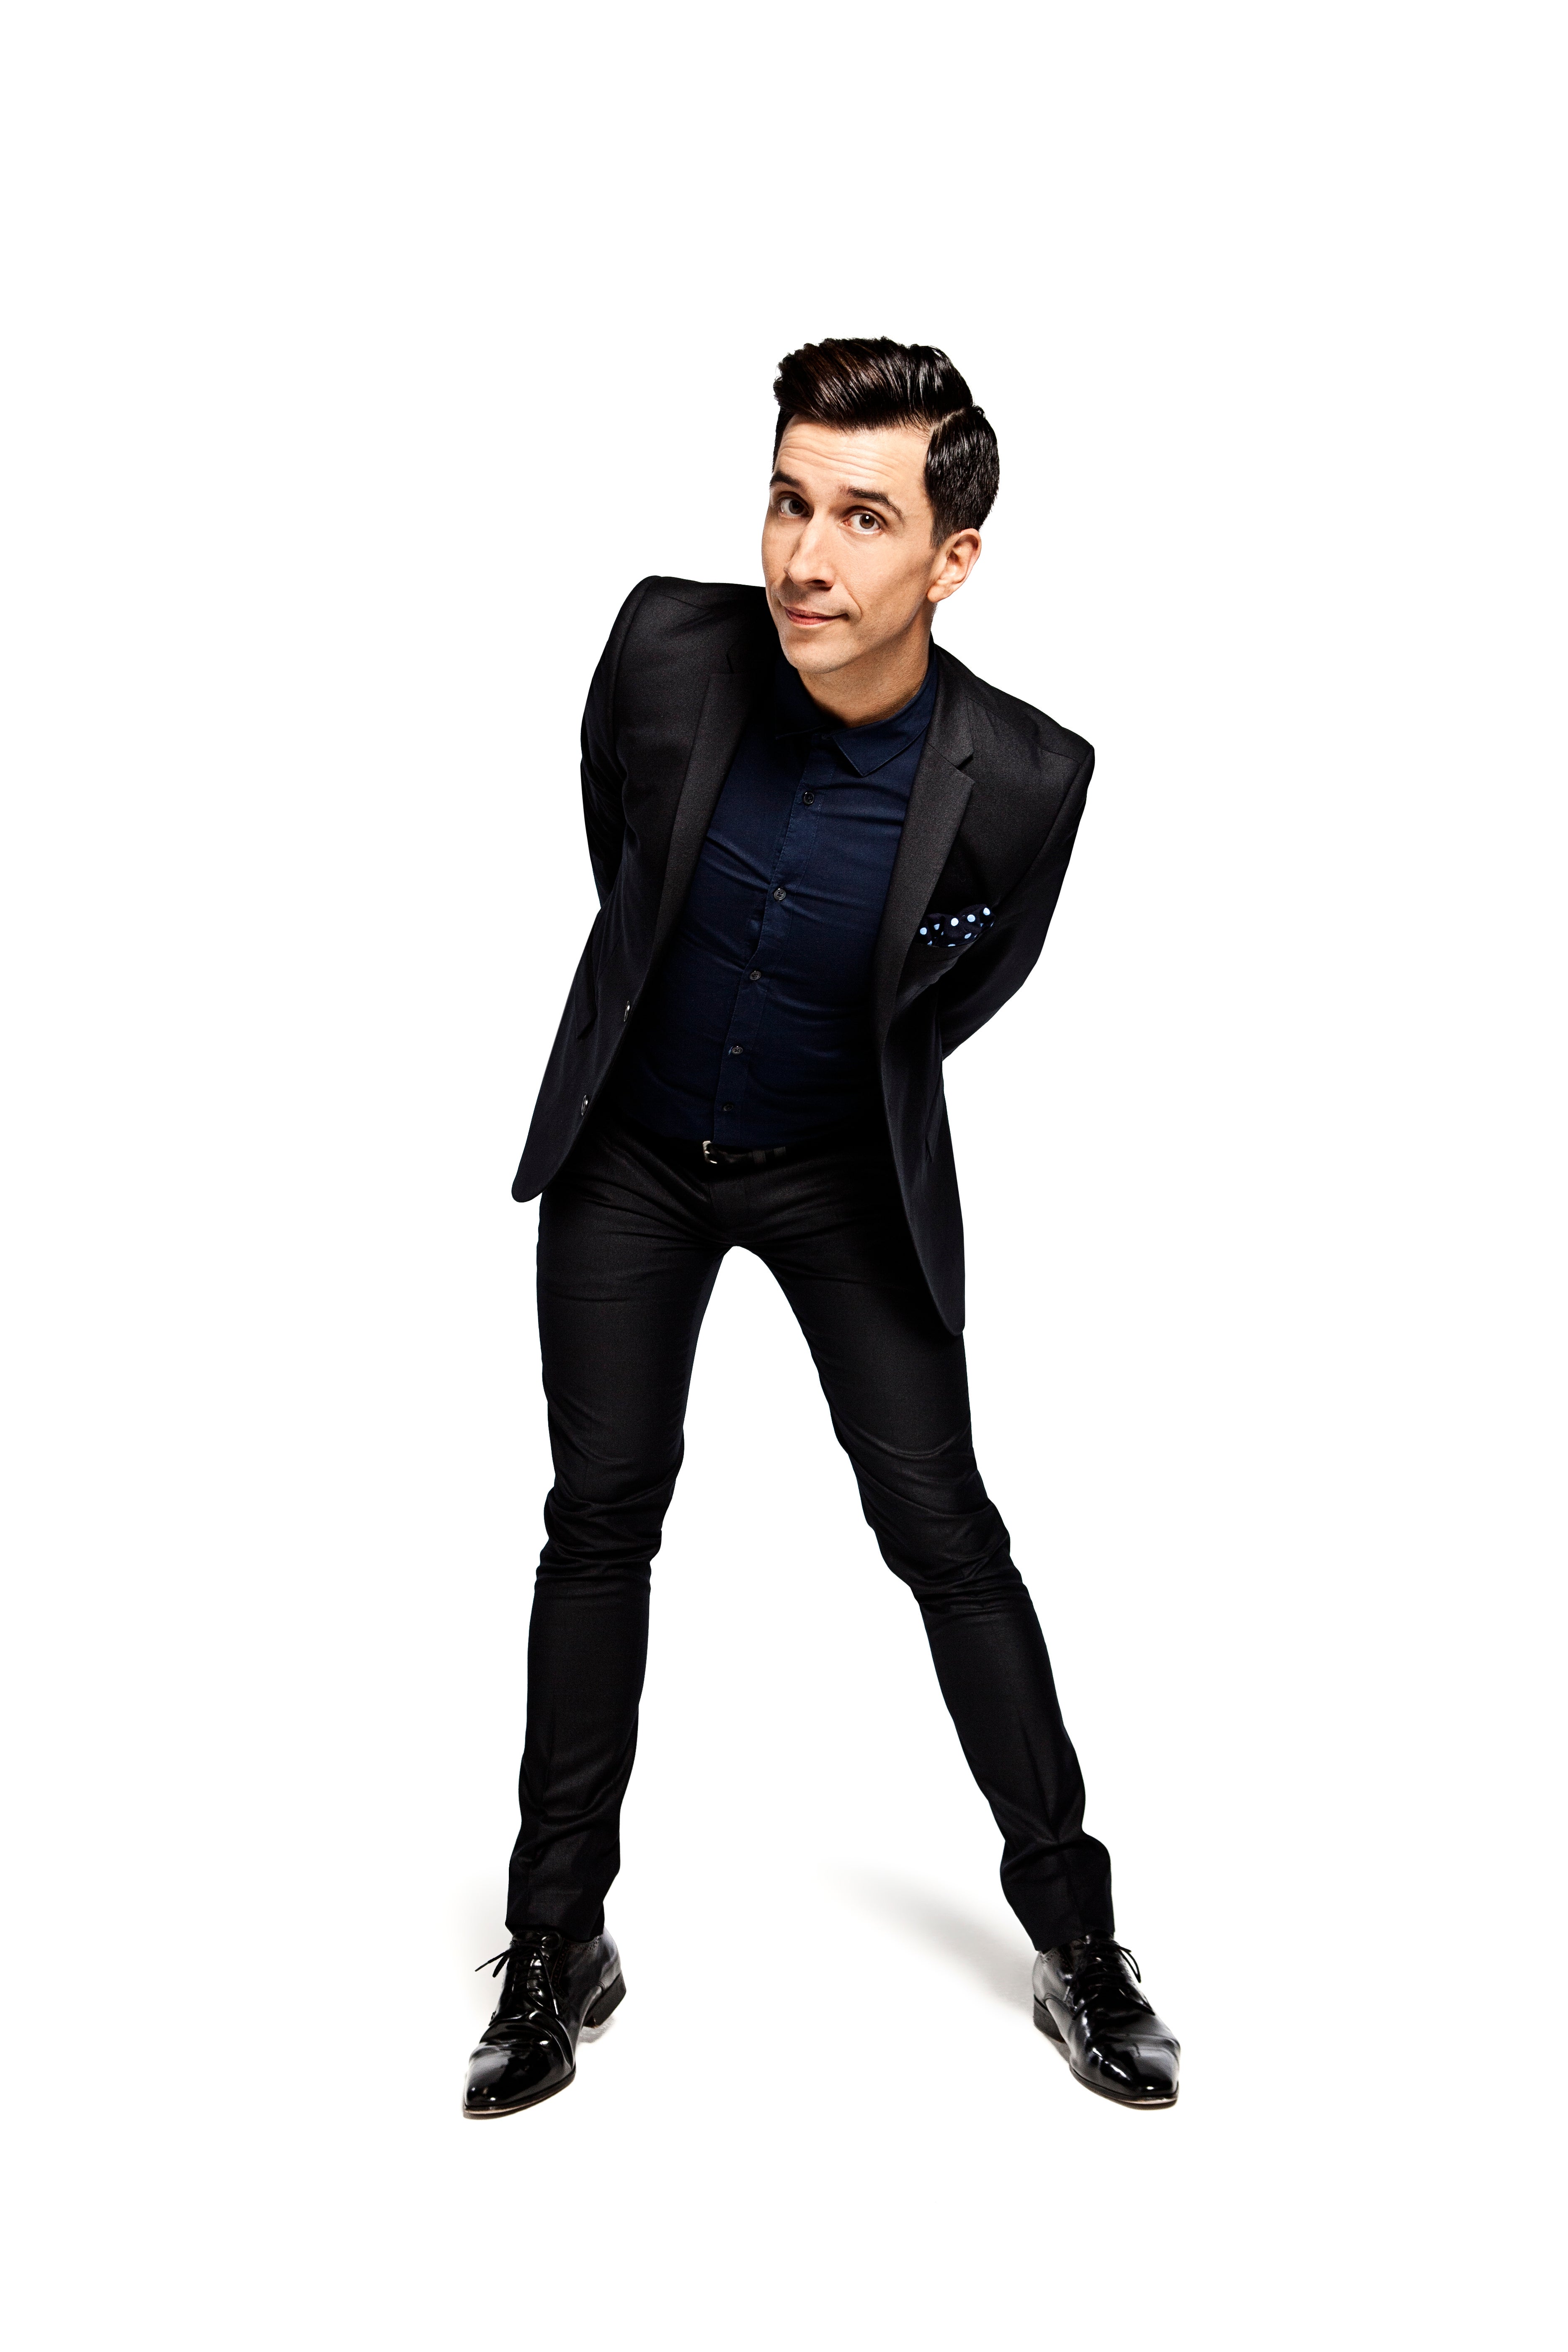 new presale password for Russell Kane: Hyperactive affordable tickets in Aylesbury at The Waterside Theatre, Aylesbury